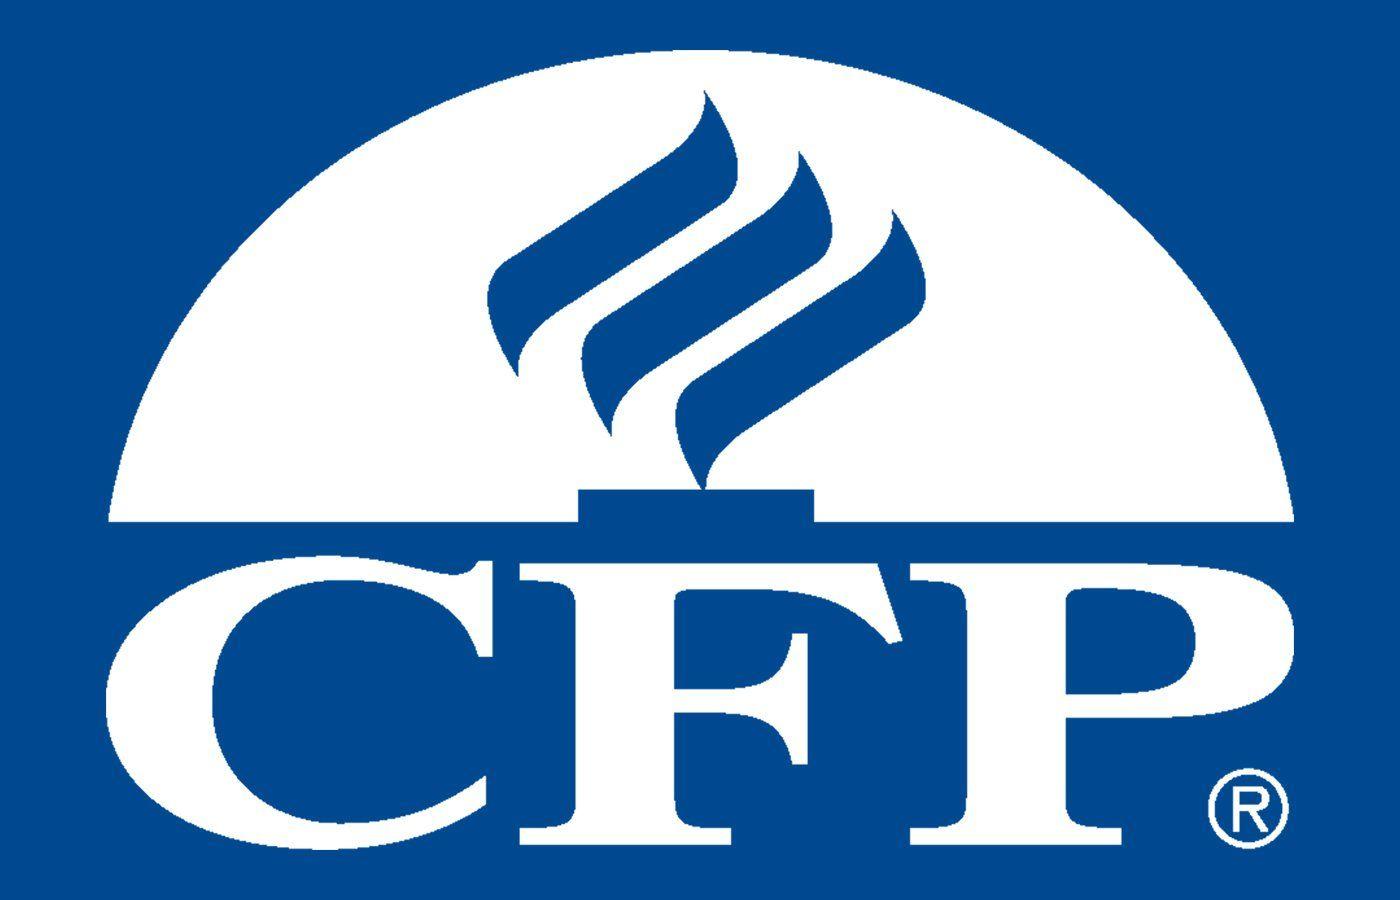 CFP Logo - Meaning Certified Financial Planner logo and symbol | history and ...